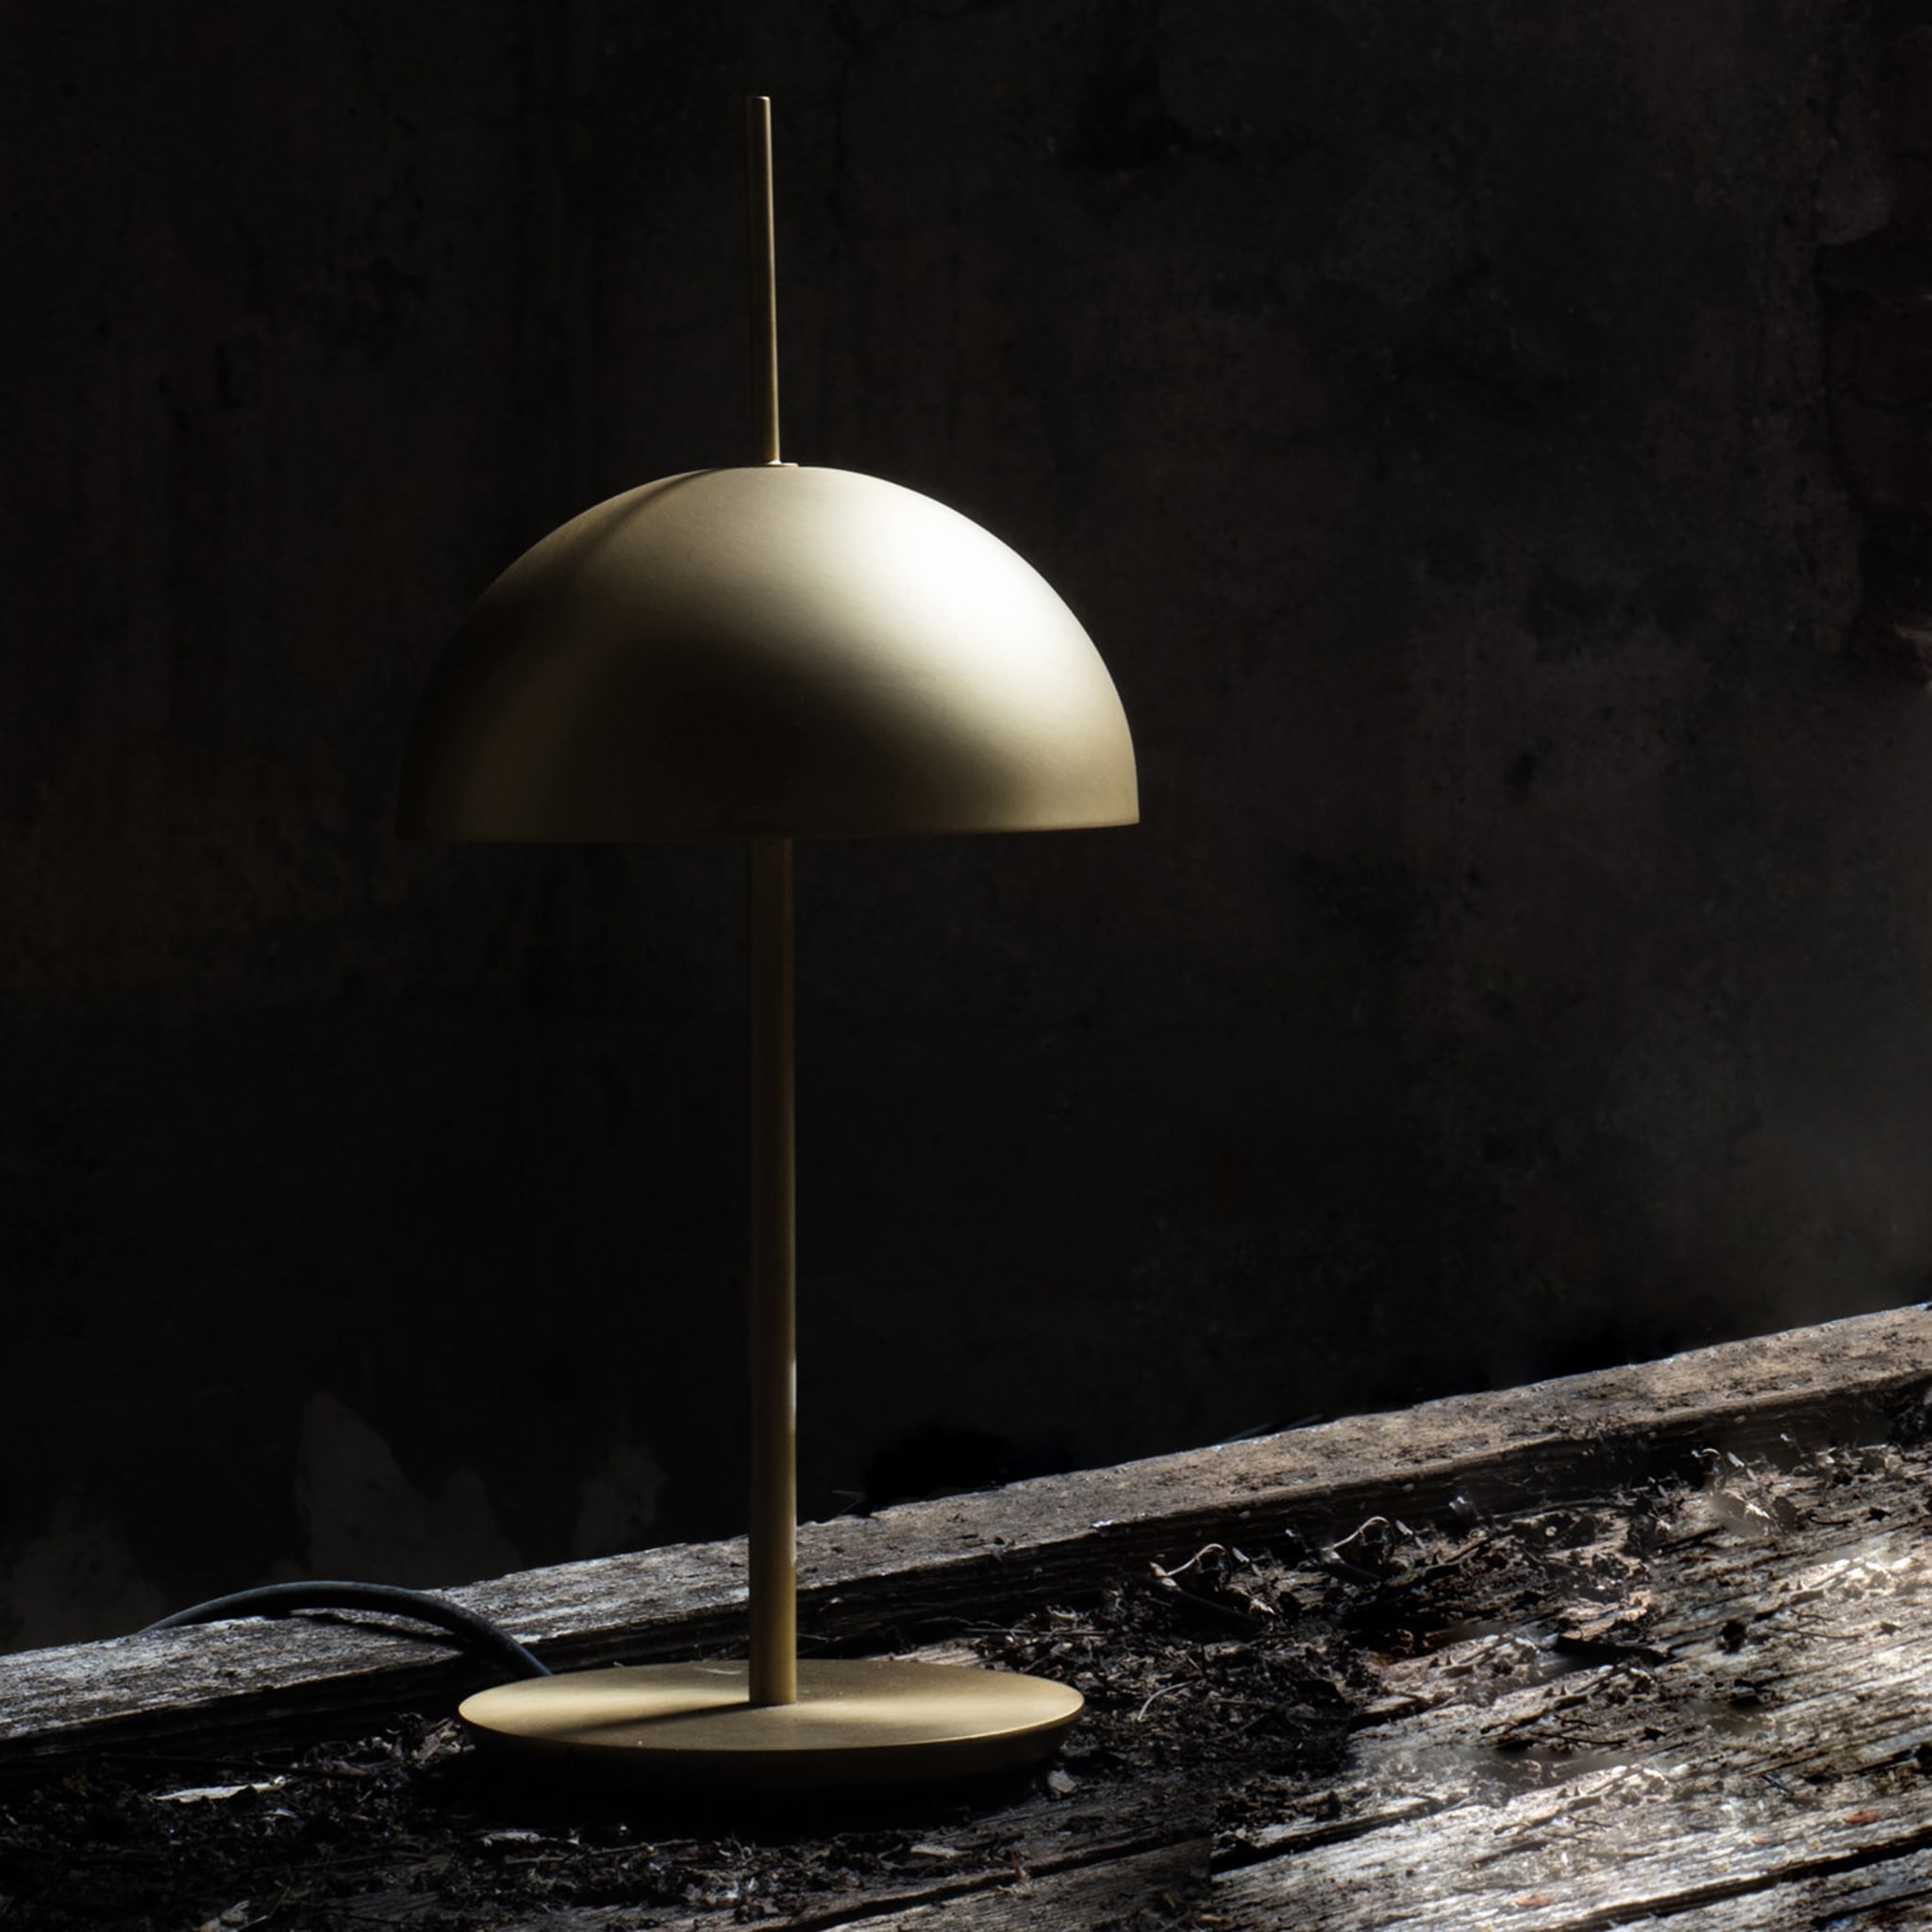 ABT01 table lamp - Alternative view 1